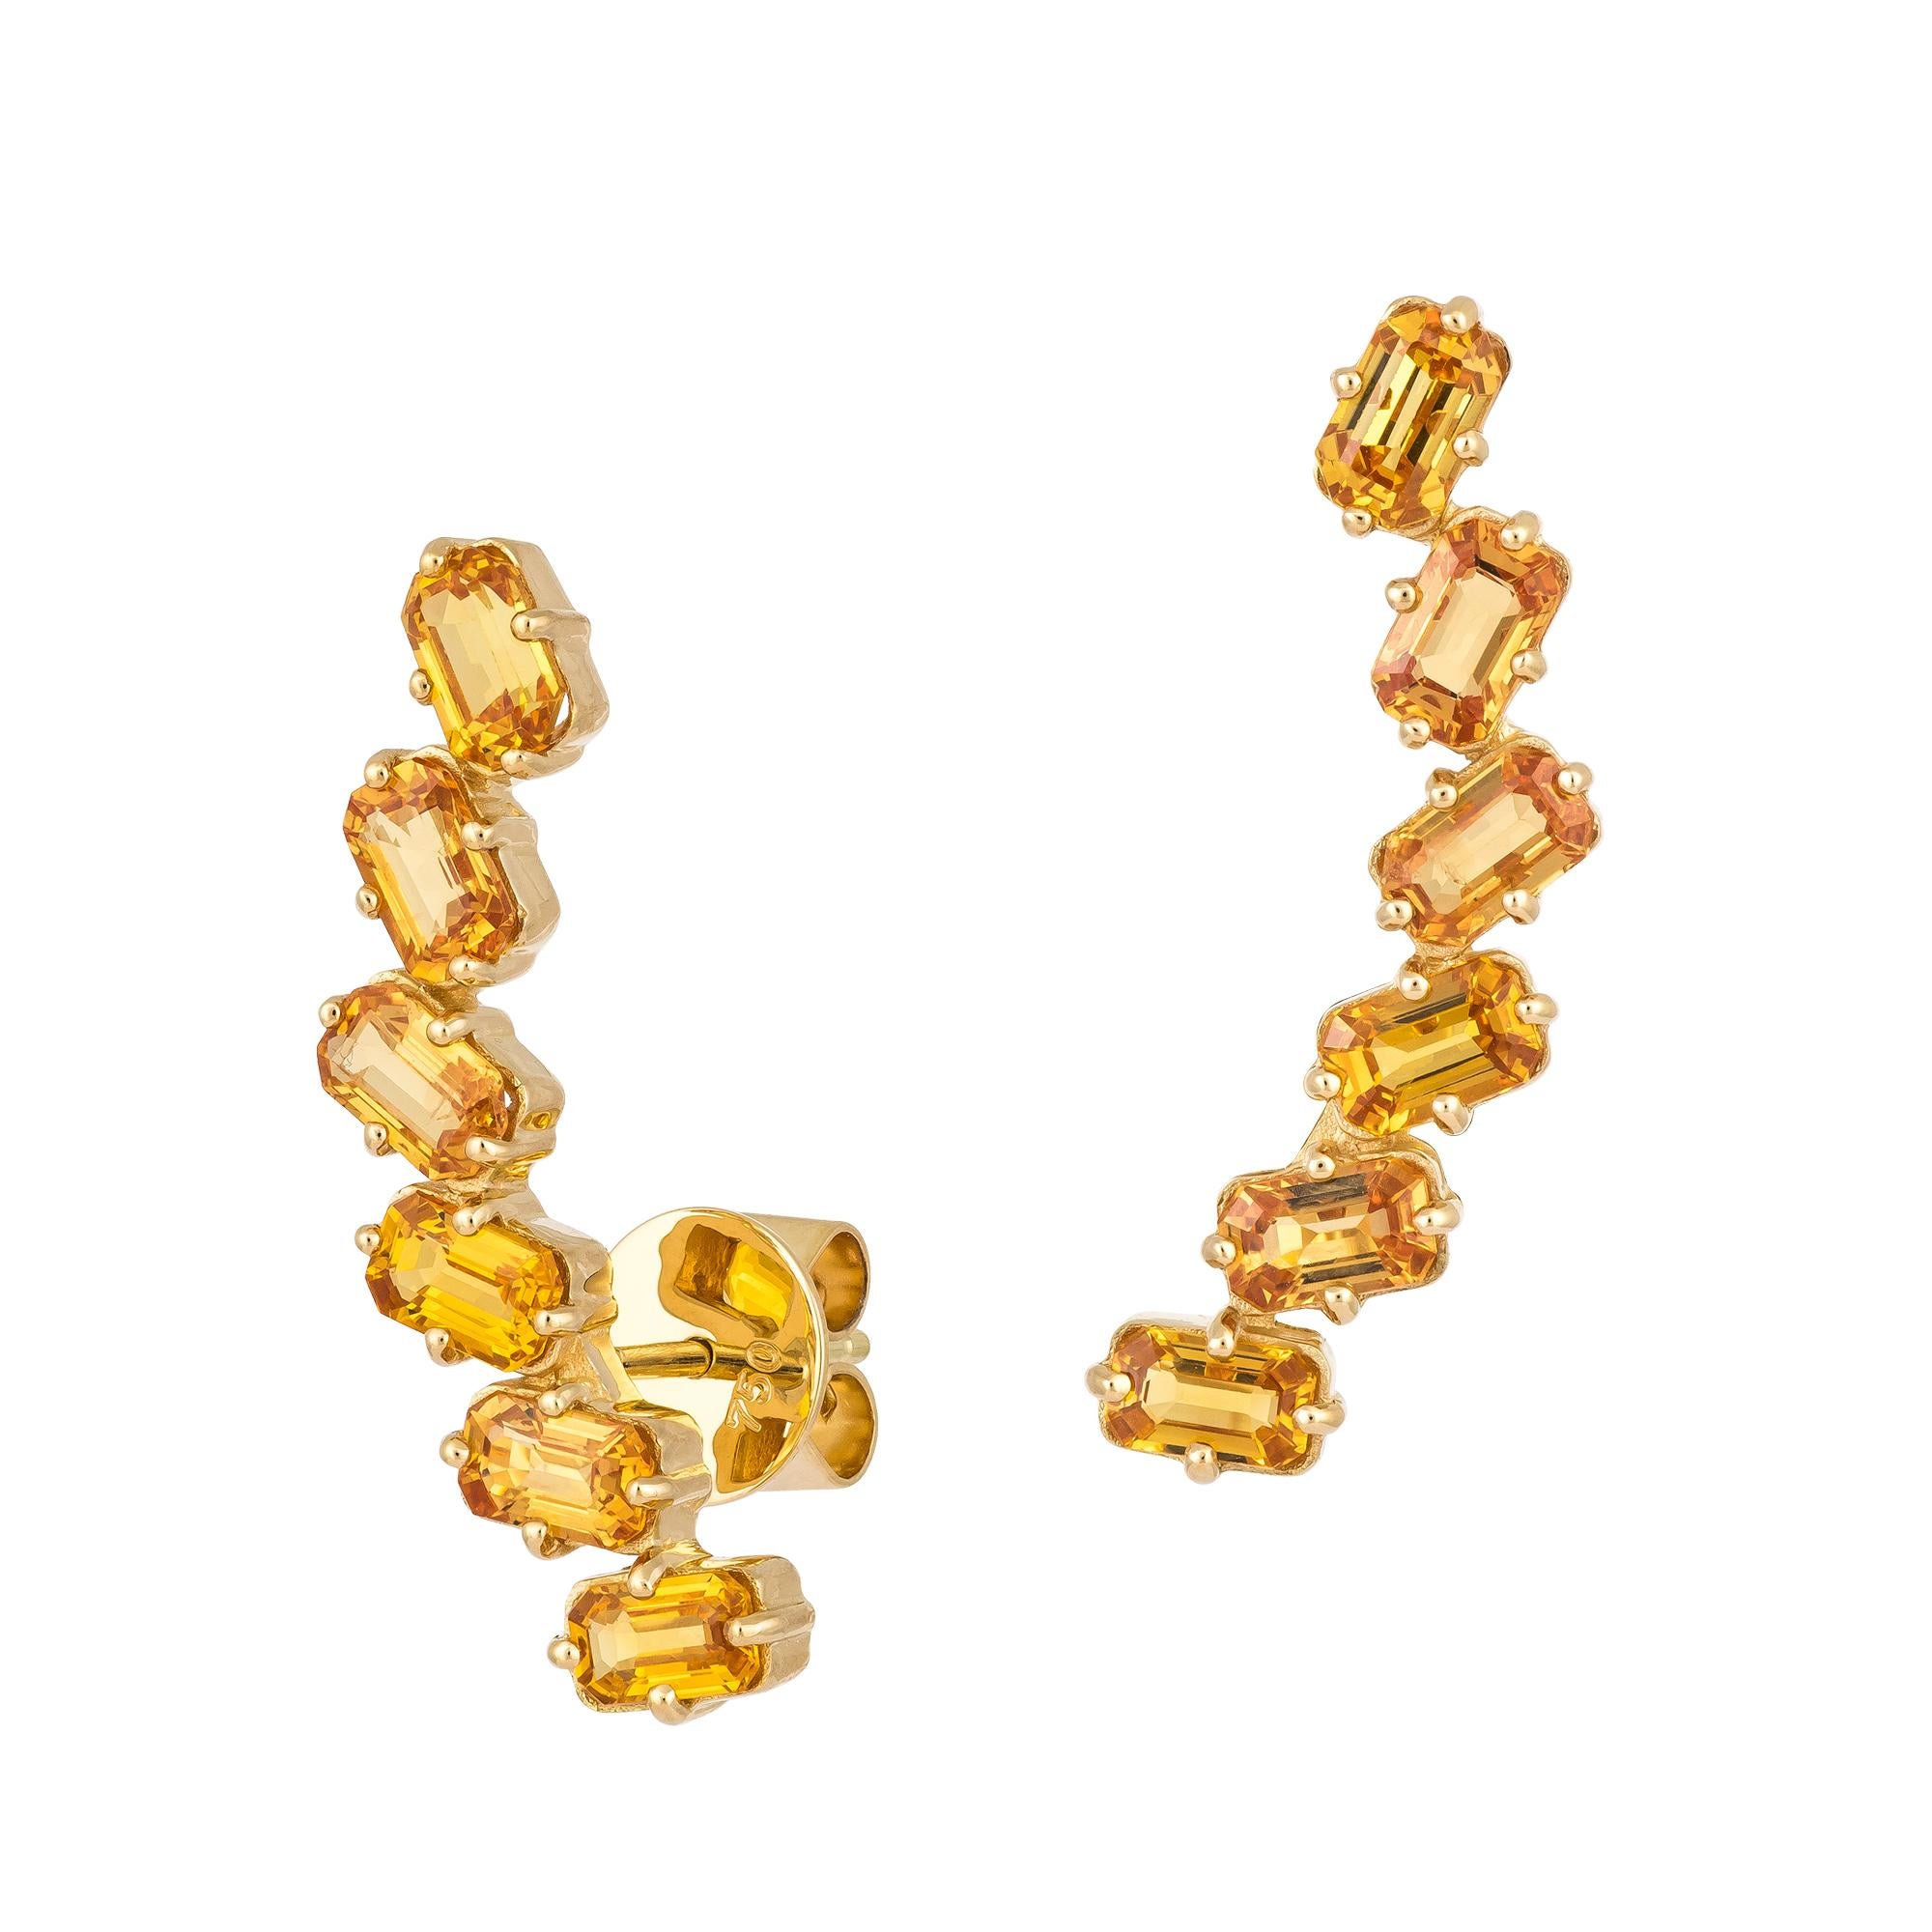 EARRING 18K Yellow Gold Yellow Sapphire 3.91 Cts/12 Pieces
